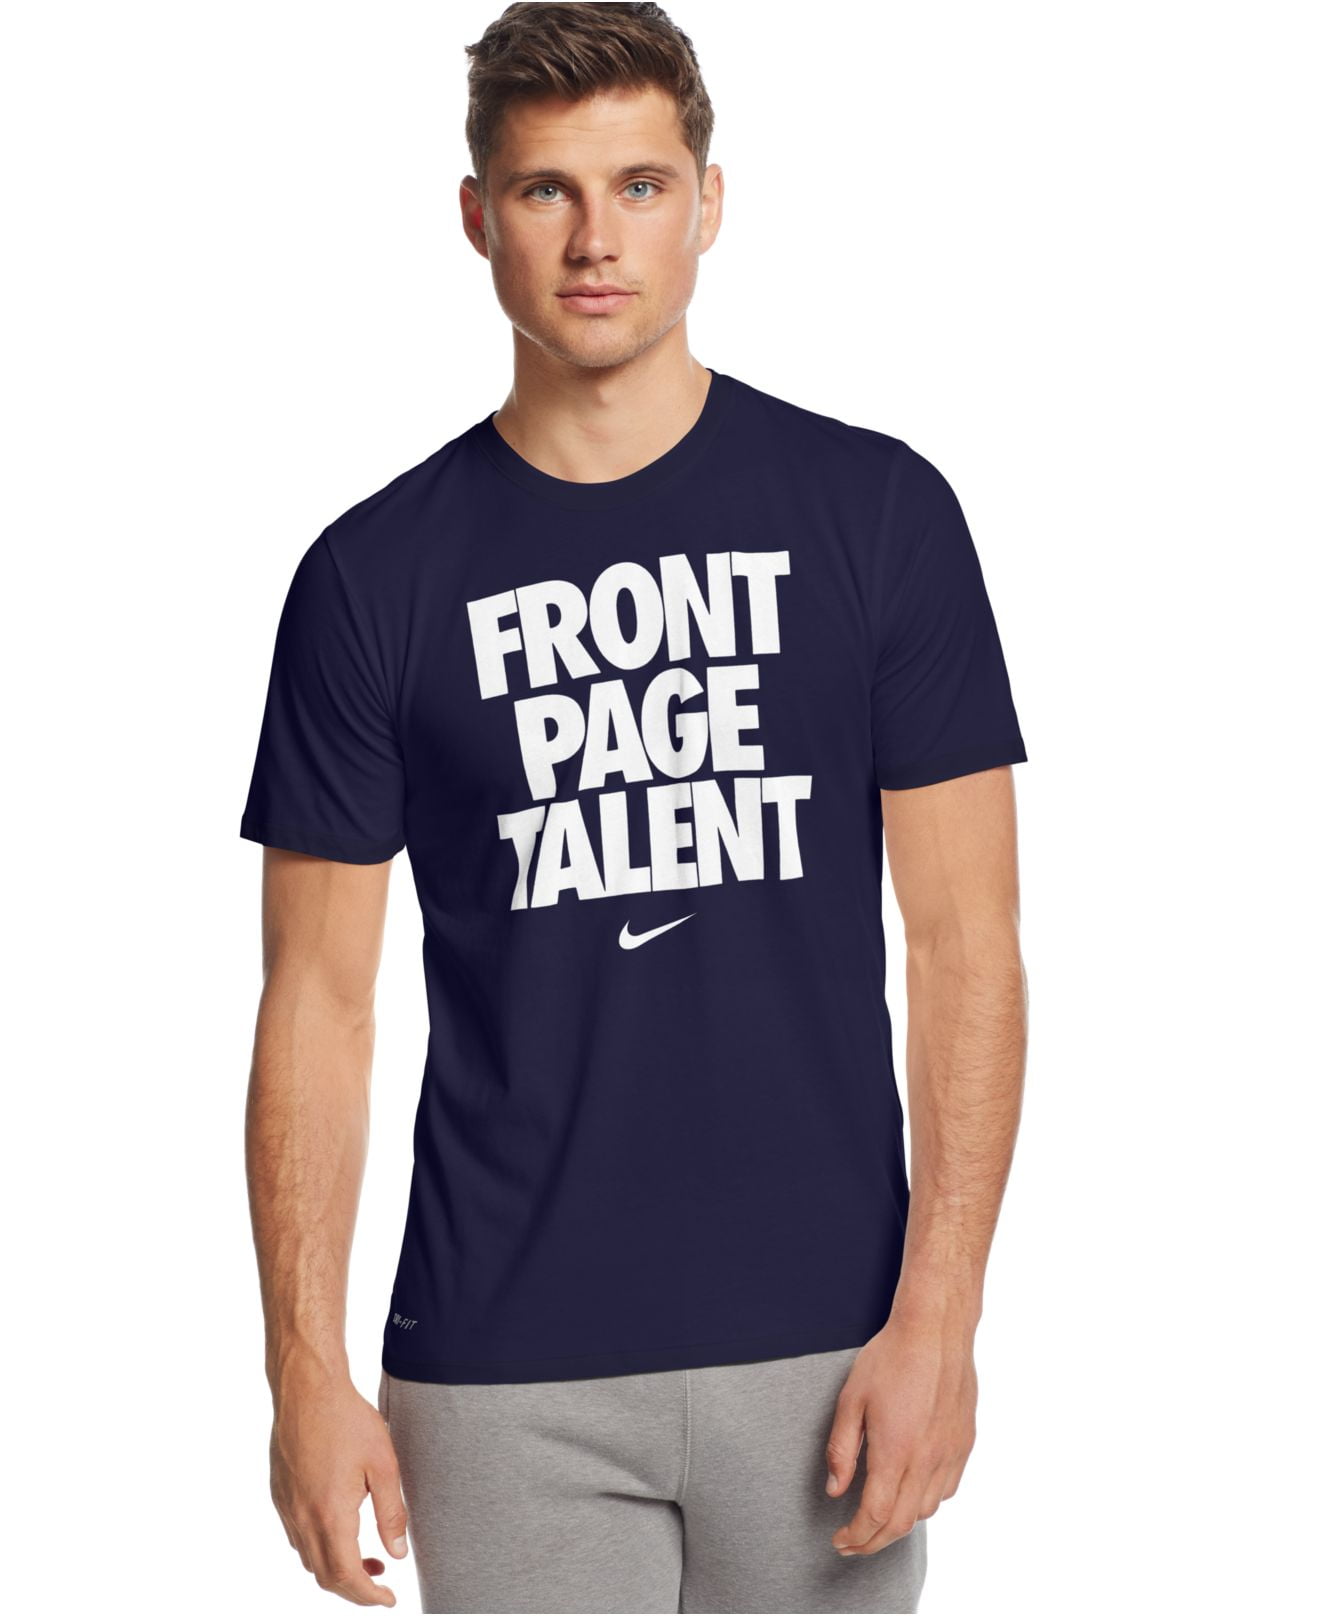 Auroch pols Syndicaat Nike Men's Front Page Talent T-Shirt Navy/White - Walmart.com